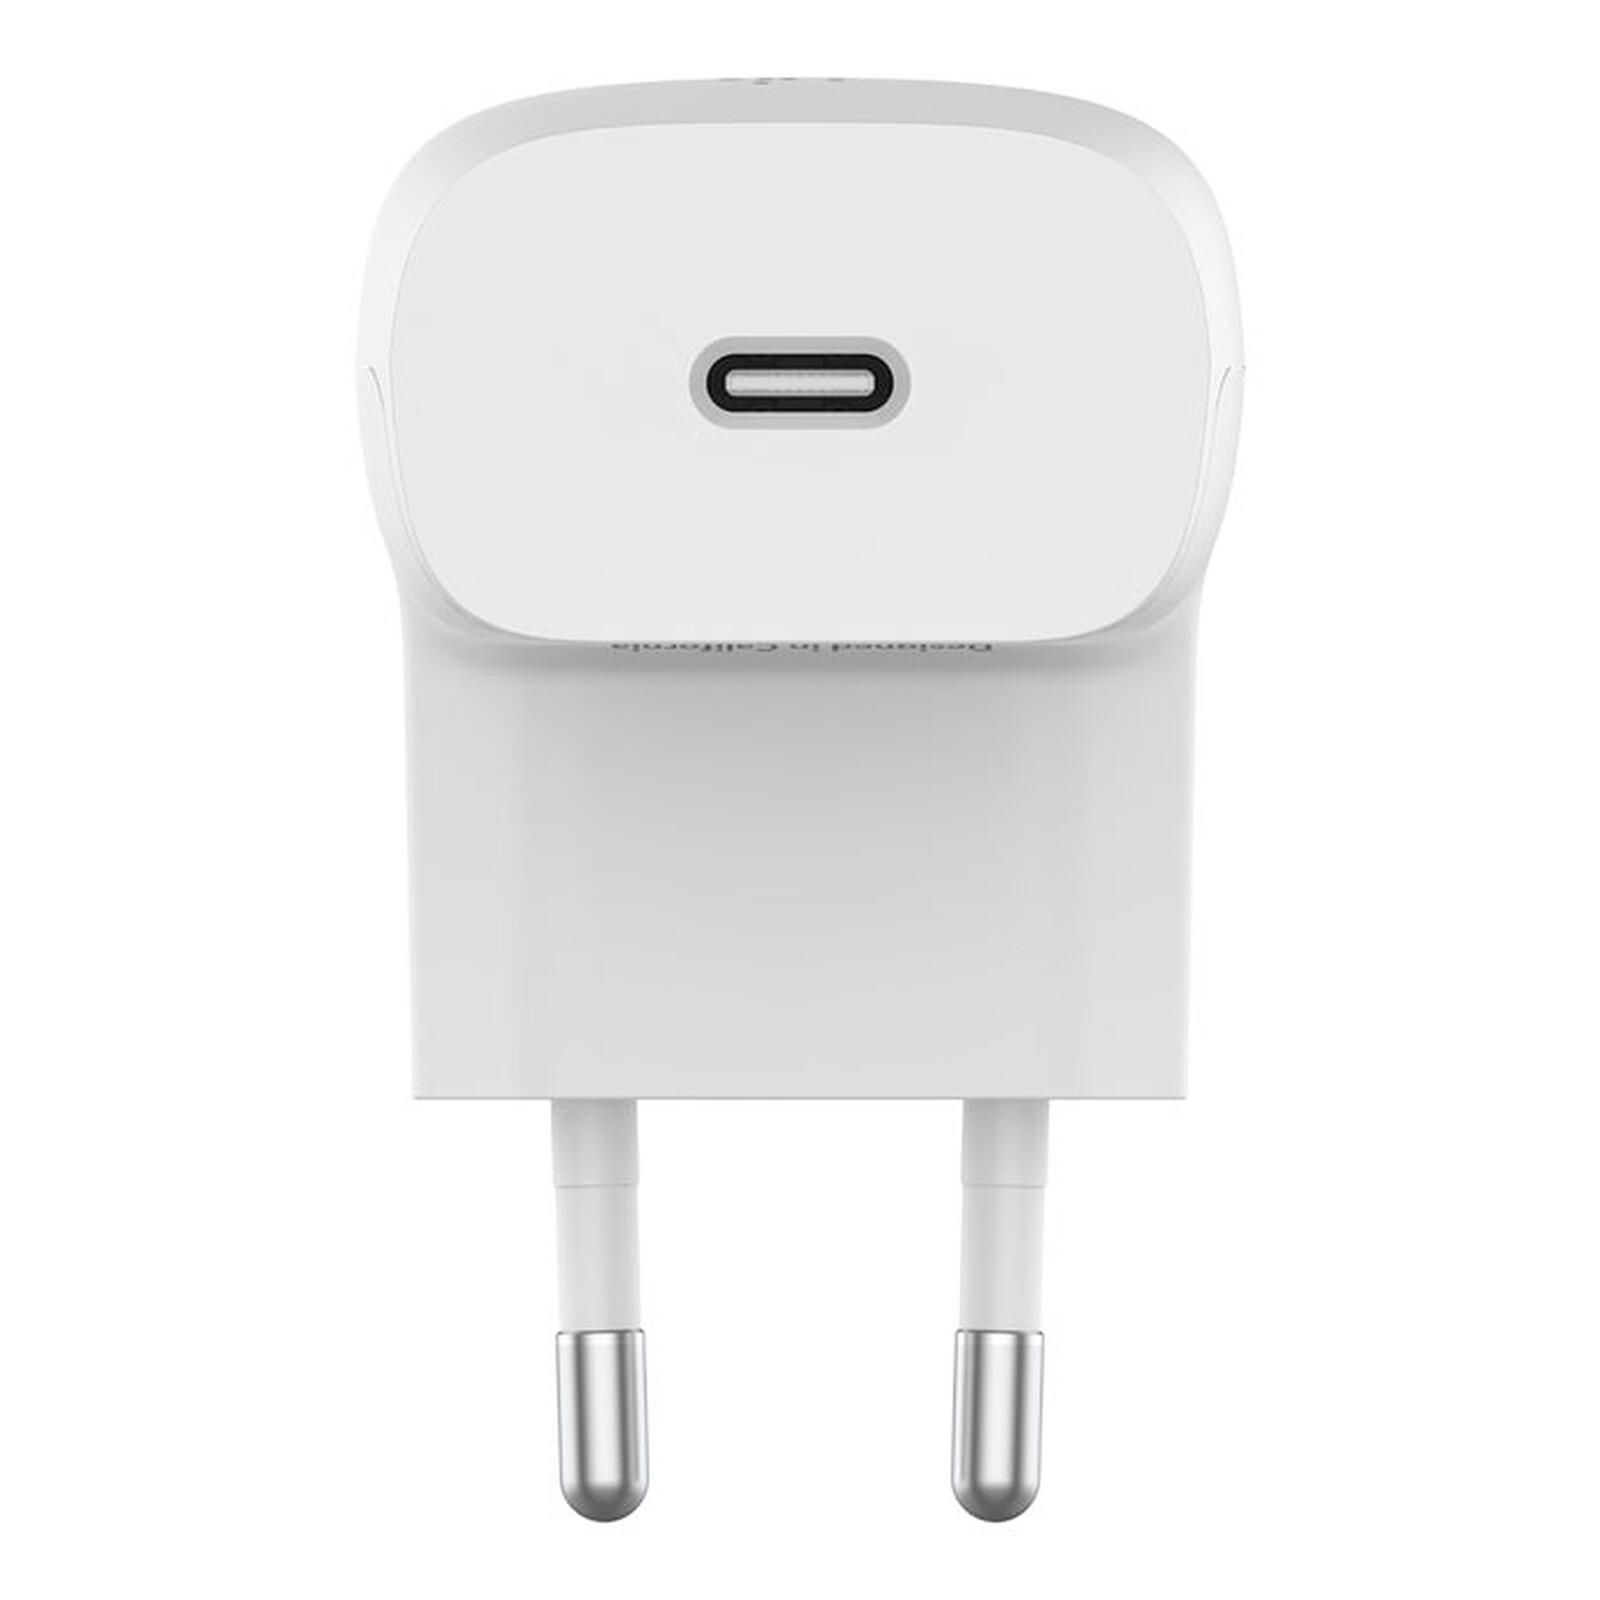 Compact USB-C Wall Charger w/Lightning Cable